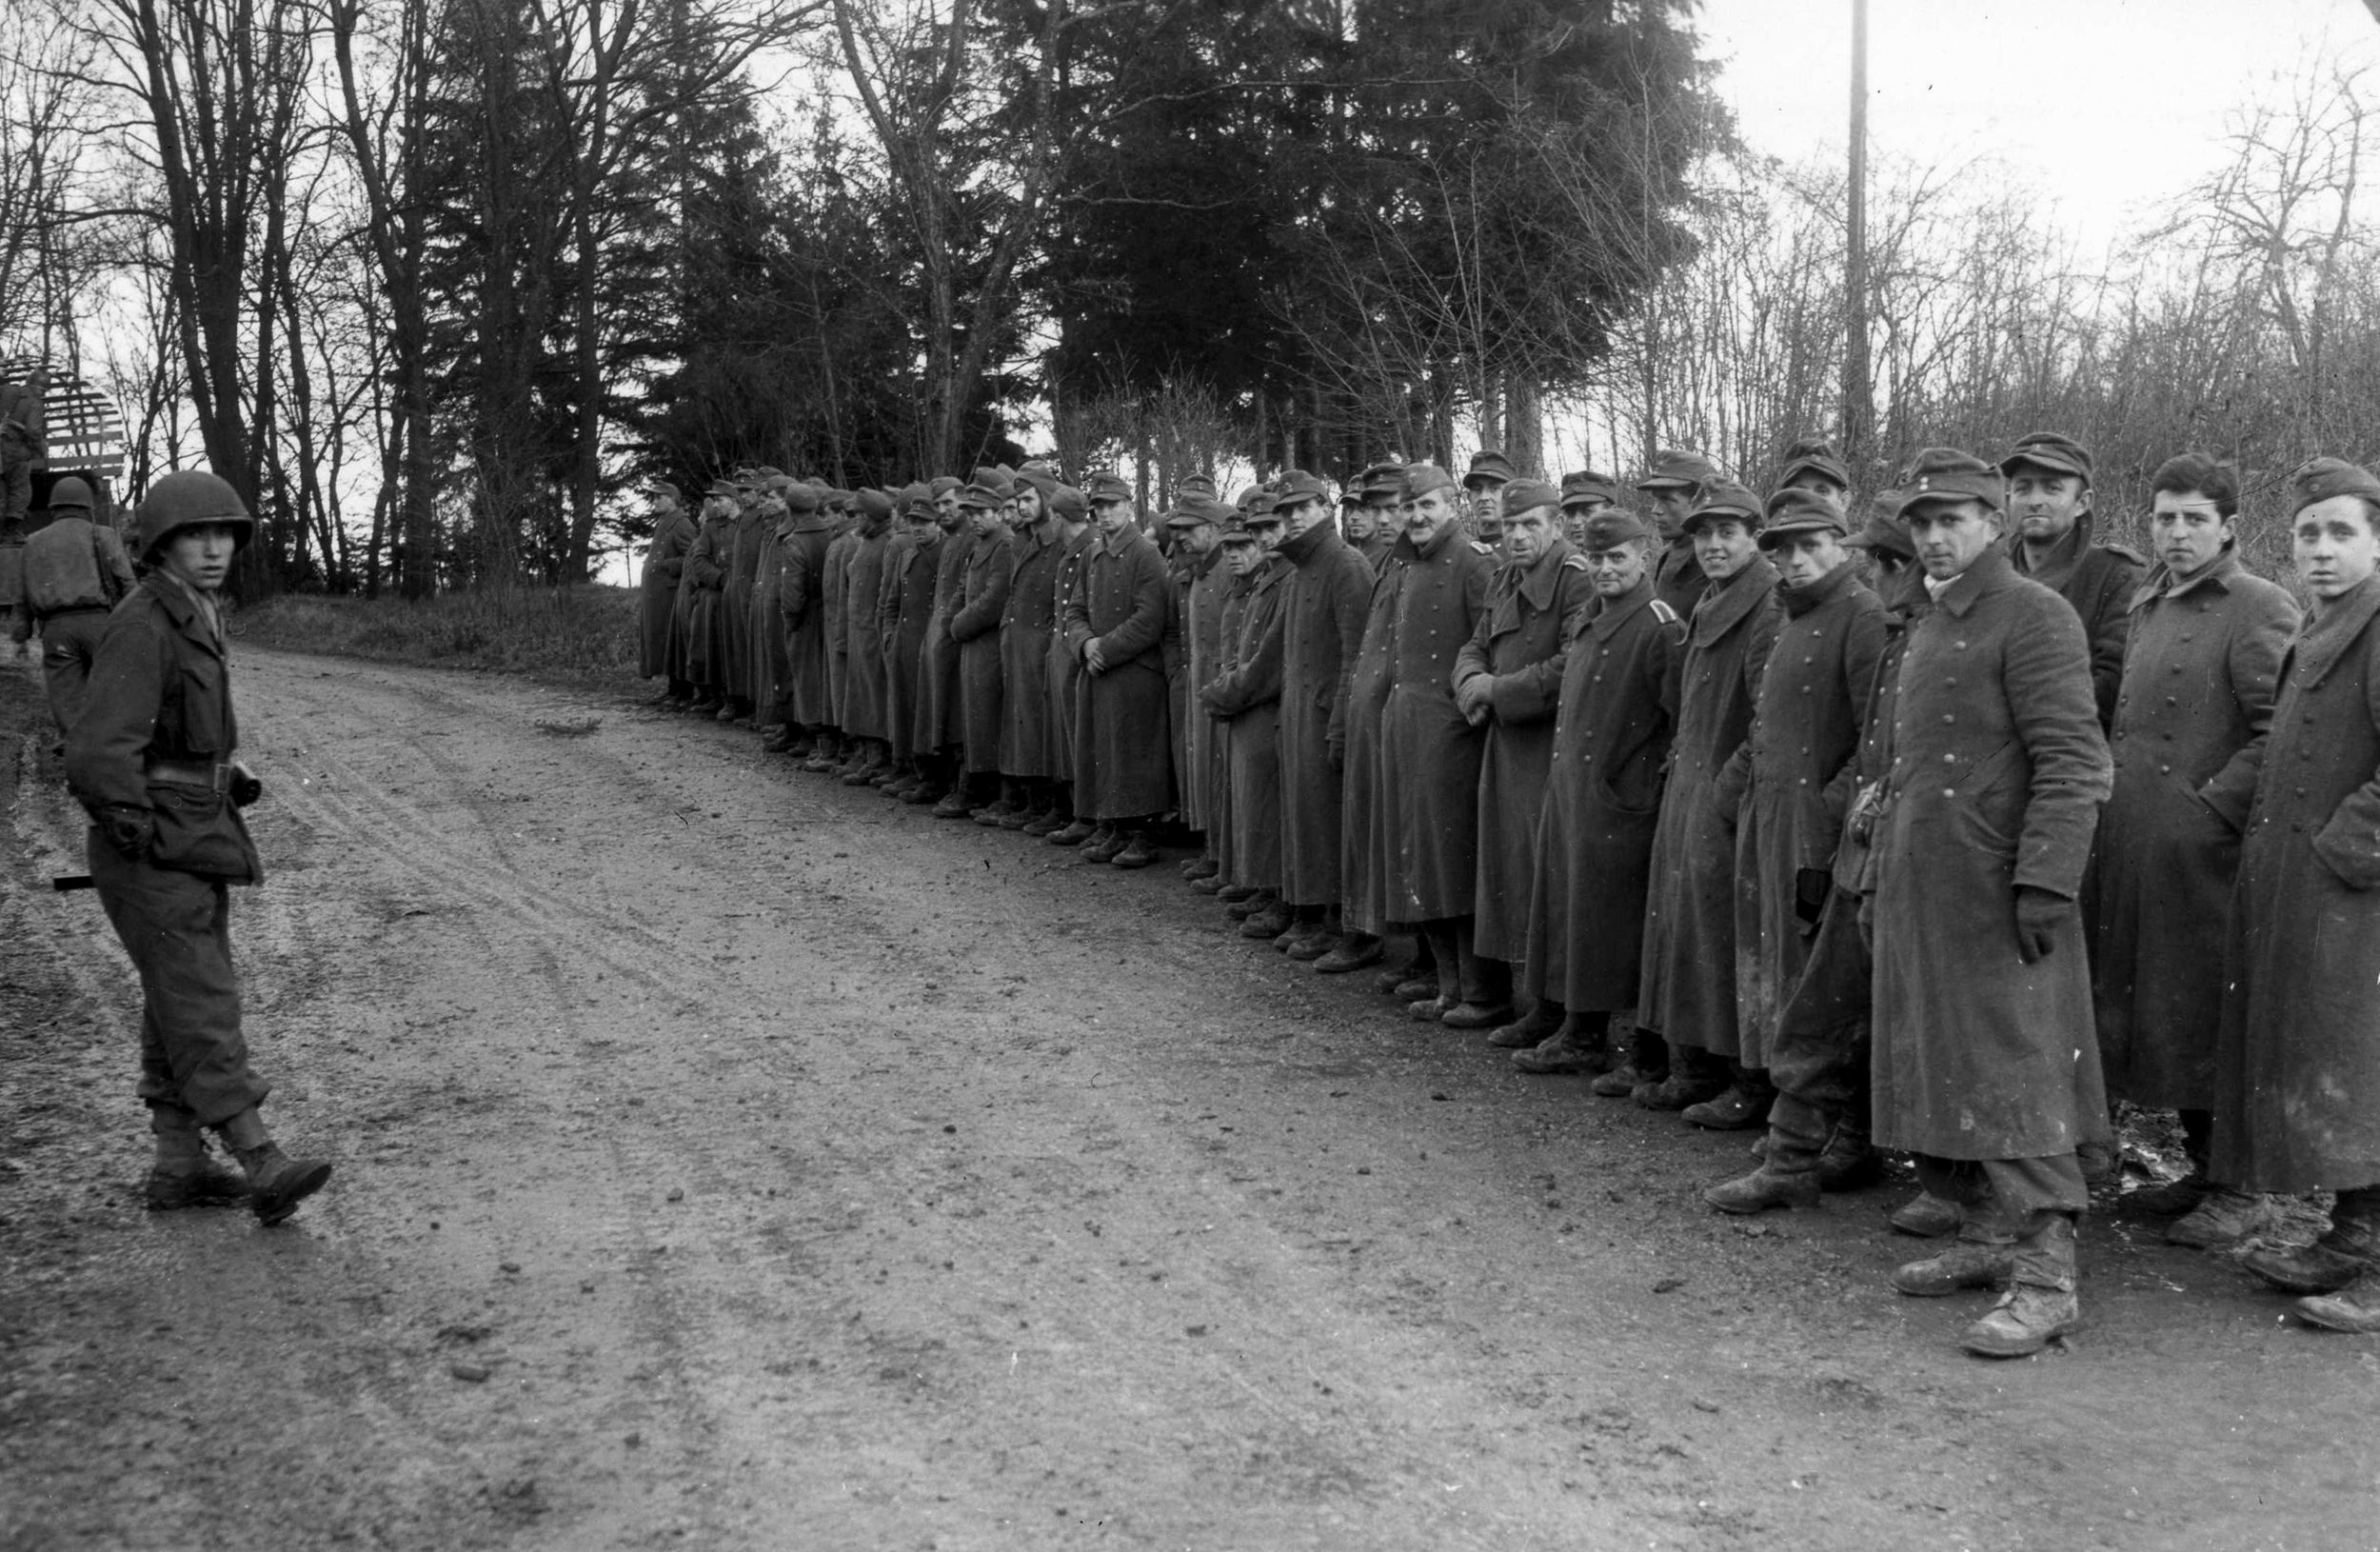 Lined up along a road to await transportation to long-term captivity, German prisoners of war appear fatigued and defeated on December 5, 1944. Eleven days later, the Battle of the Bulge erupted to the north.